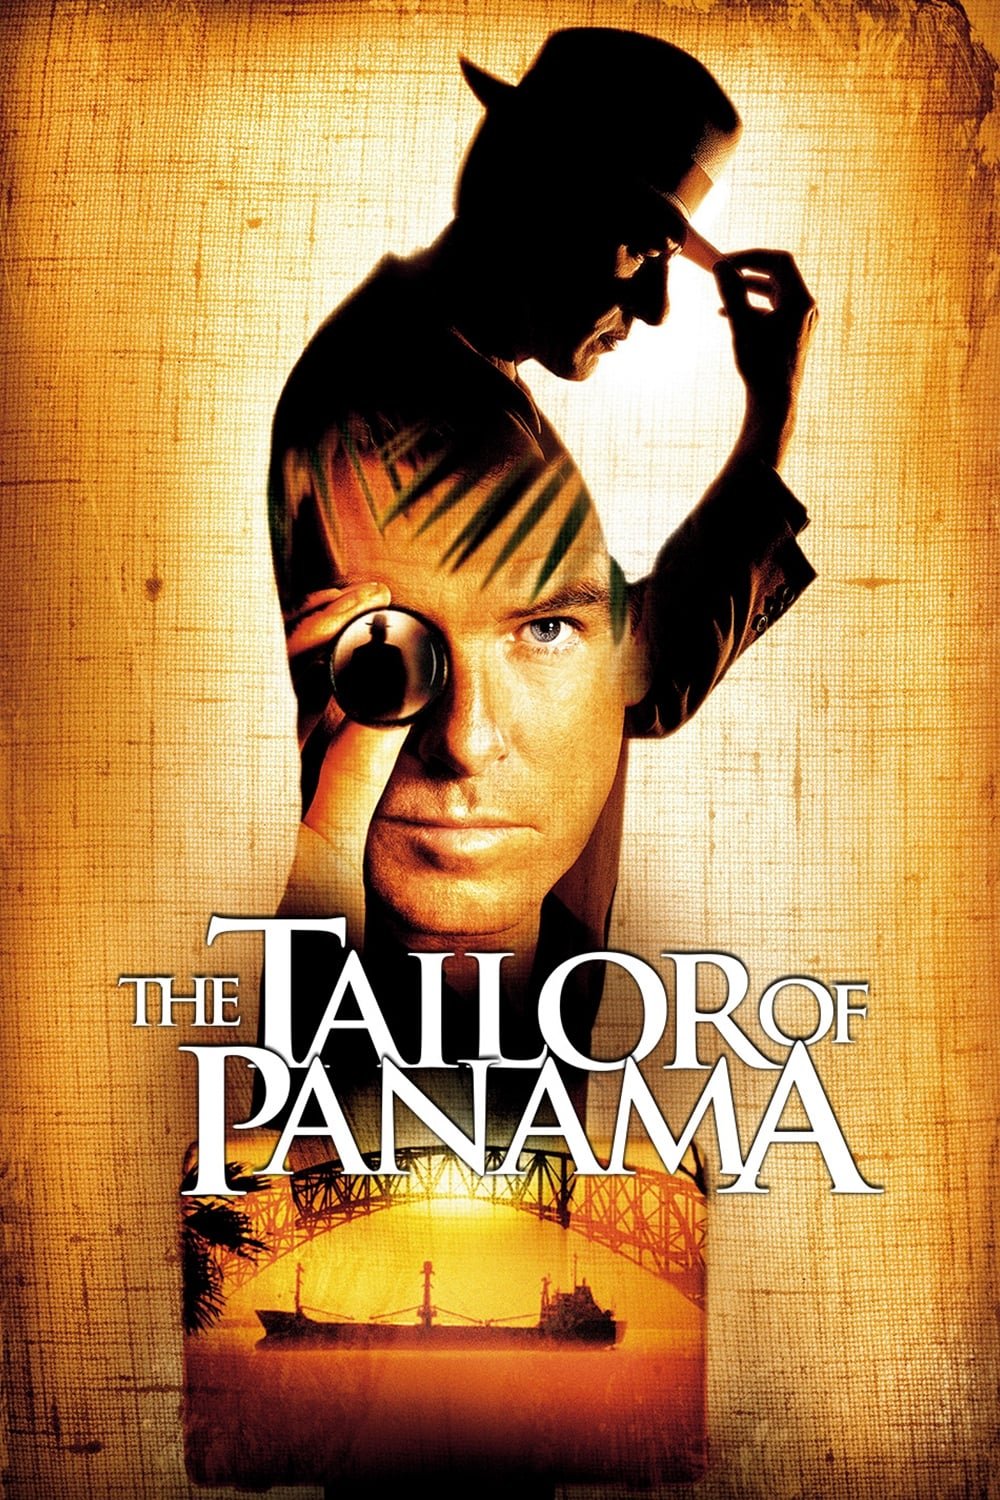 The Tailor of Panama (2001)